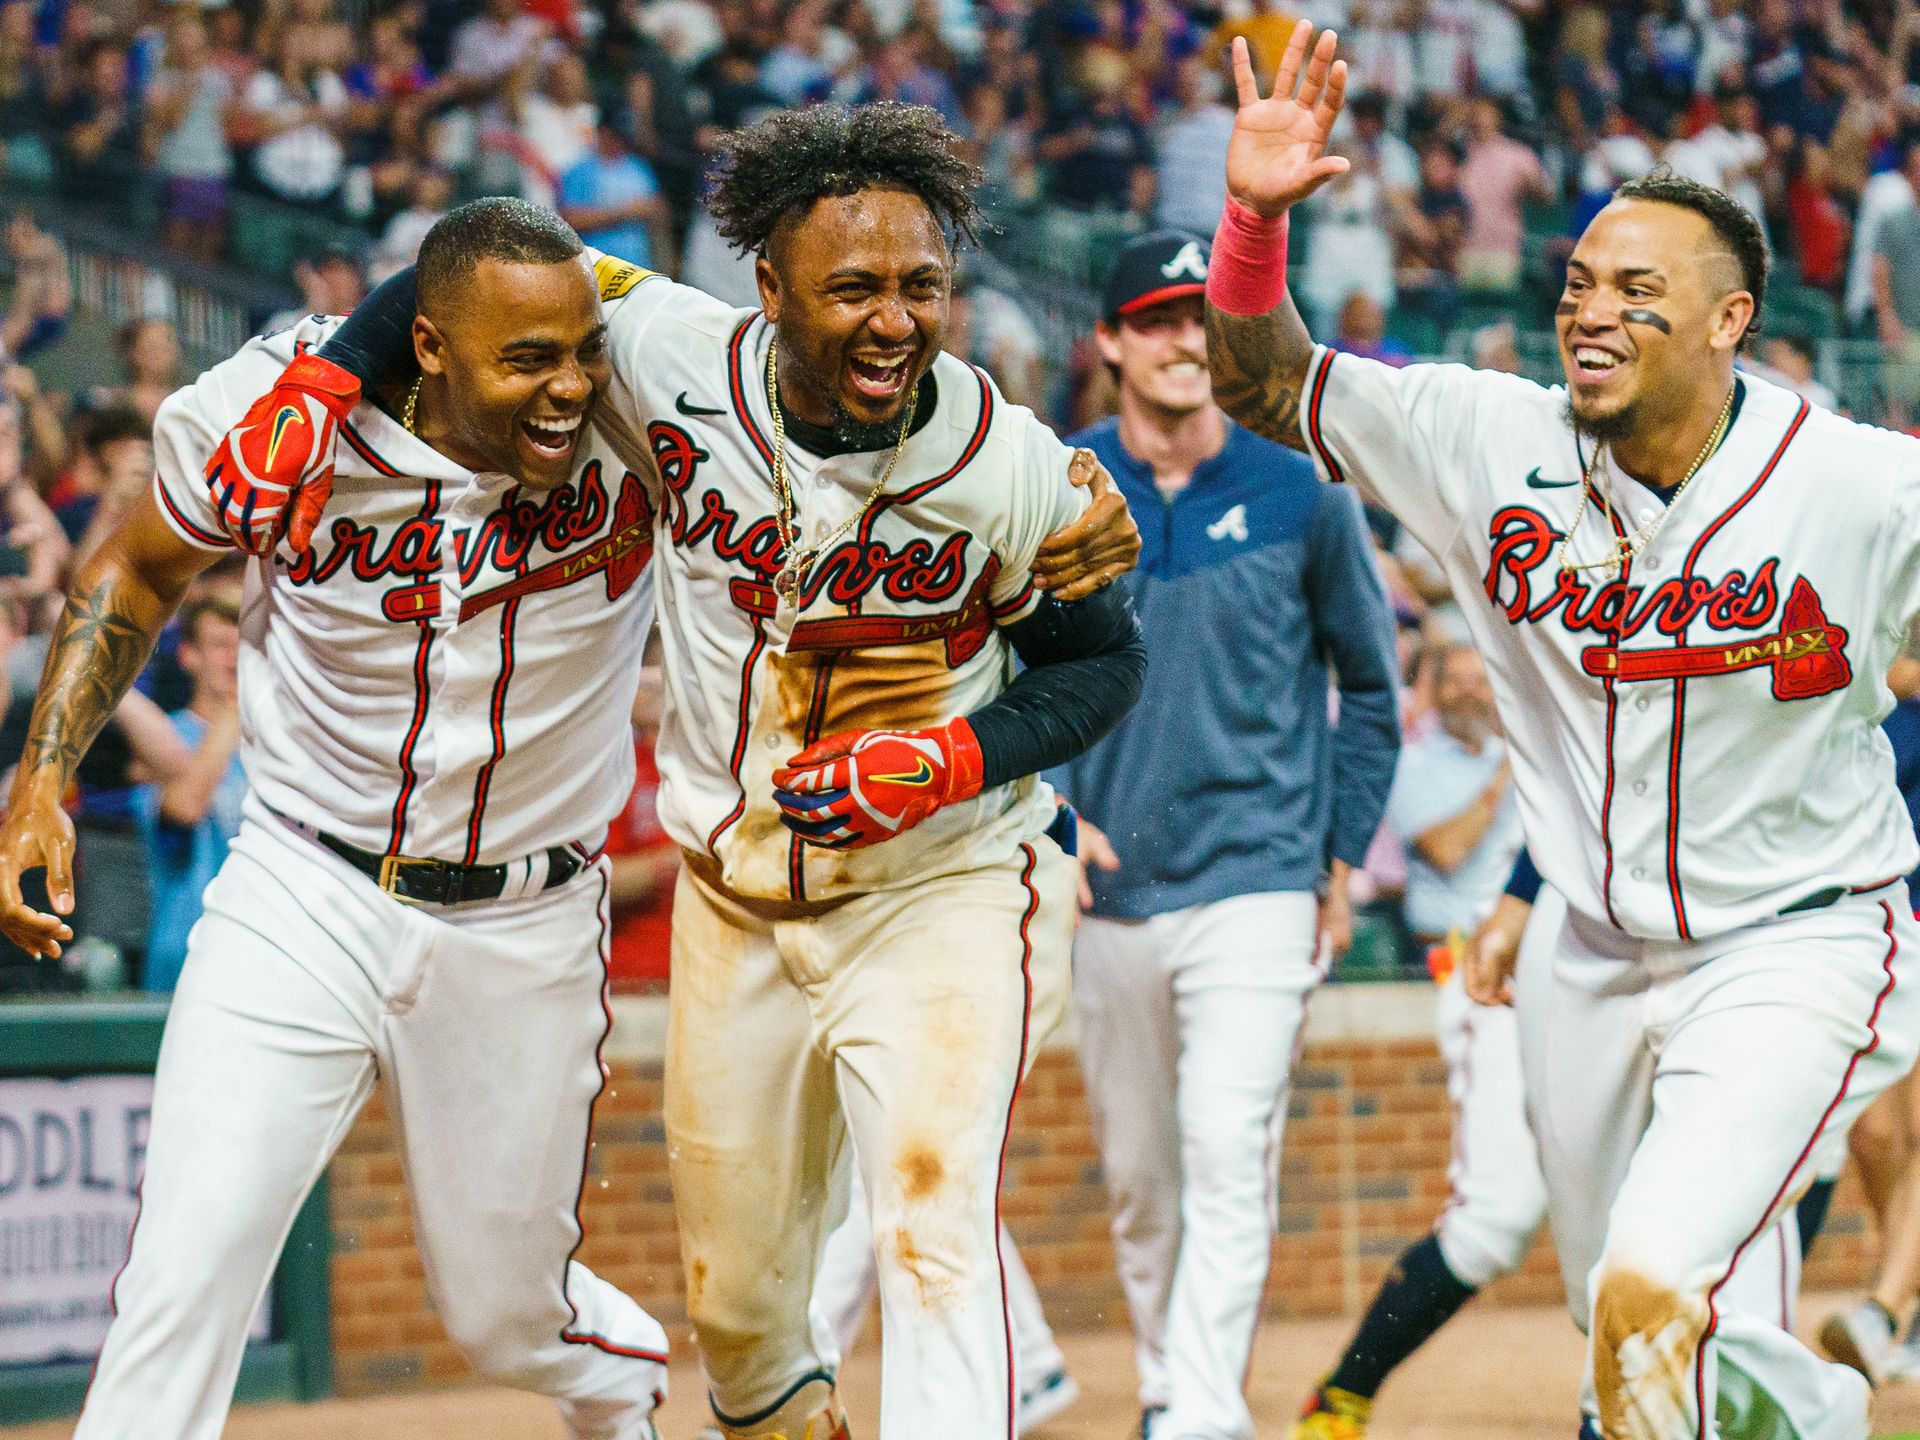 The Opening Day lineup for your 2018 Atlanta Braves - the first